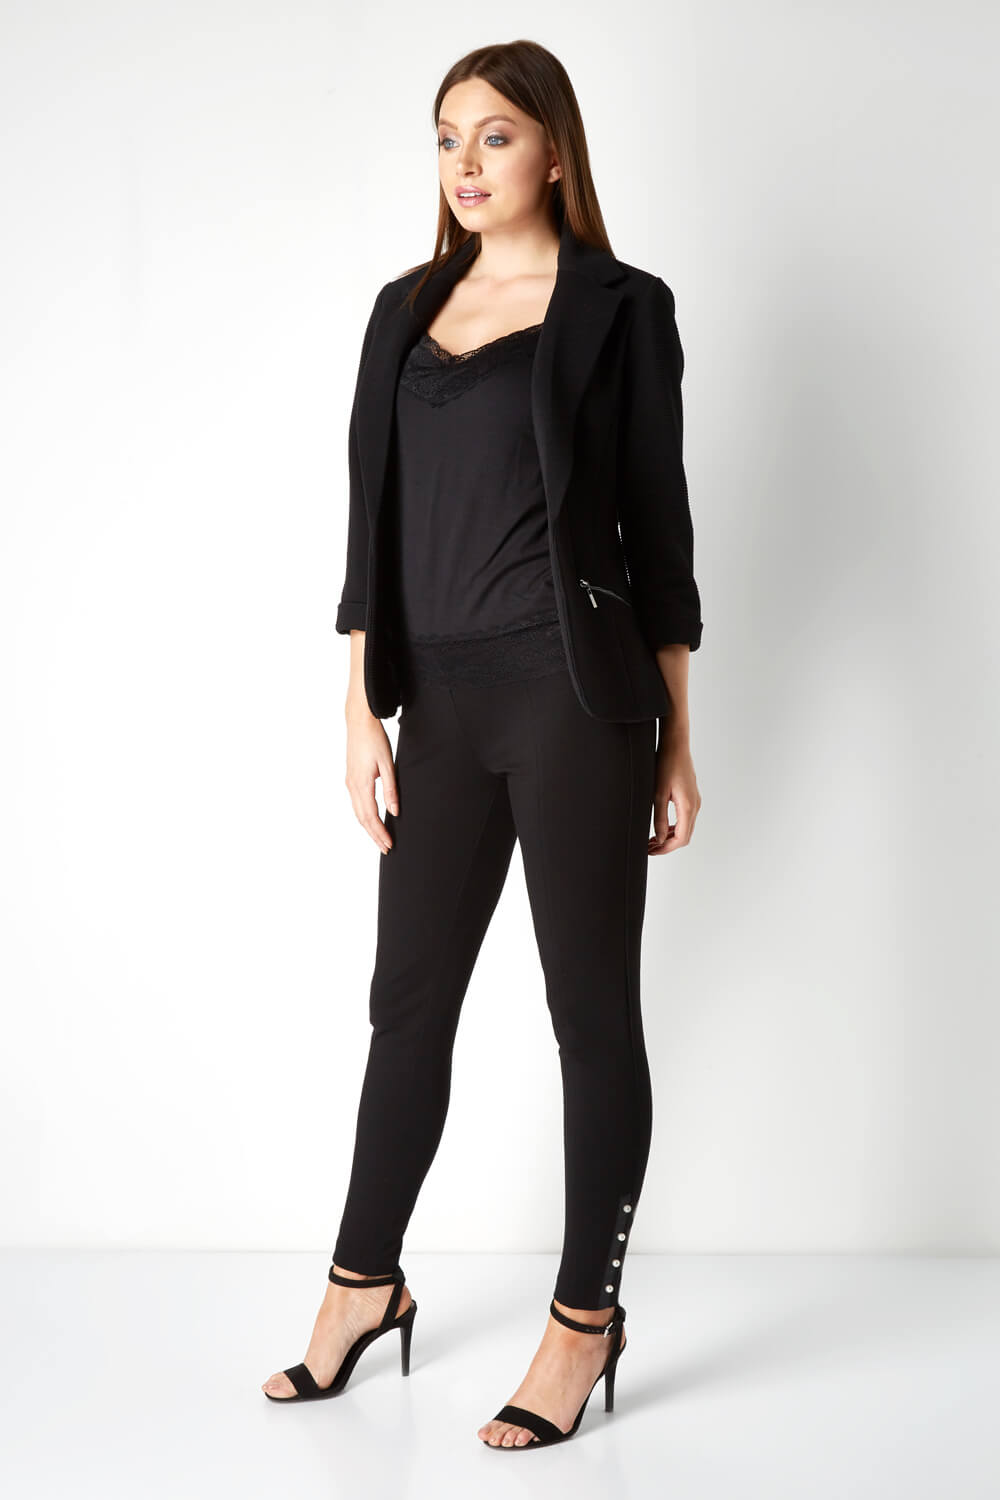 Black Pearl Detail Stretch Trousers, Image 3 of 5